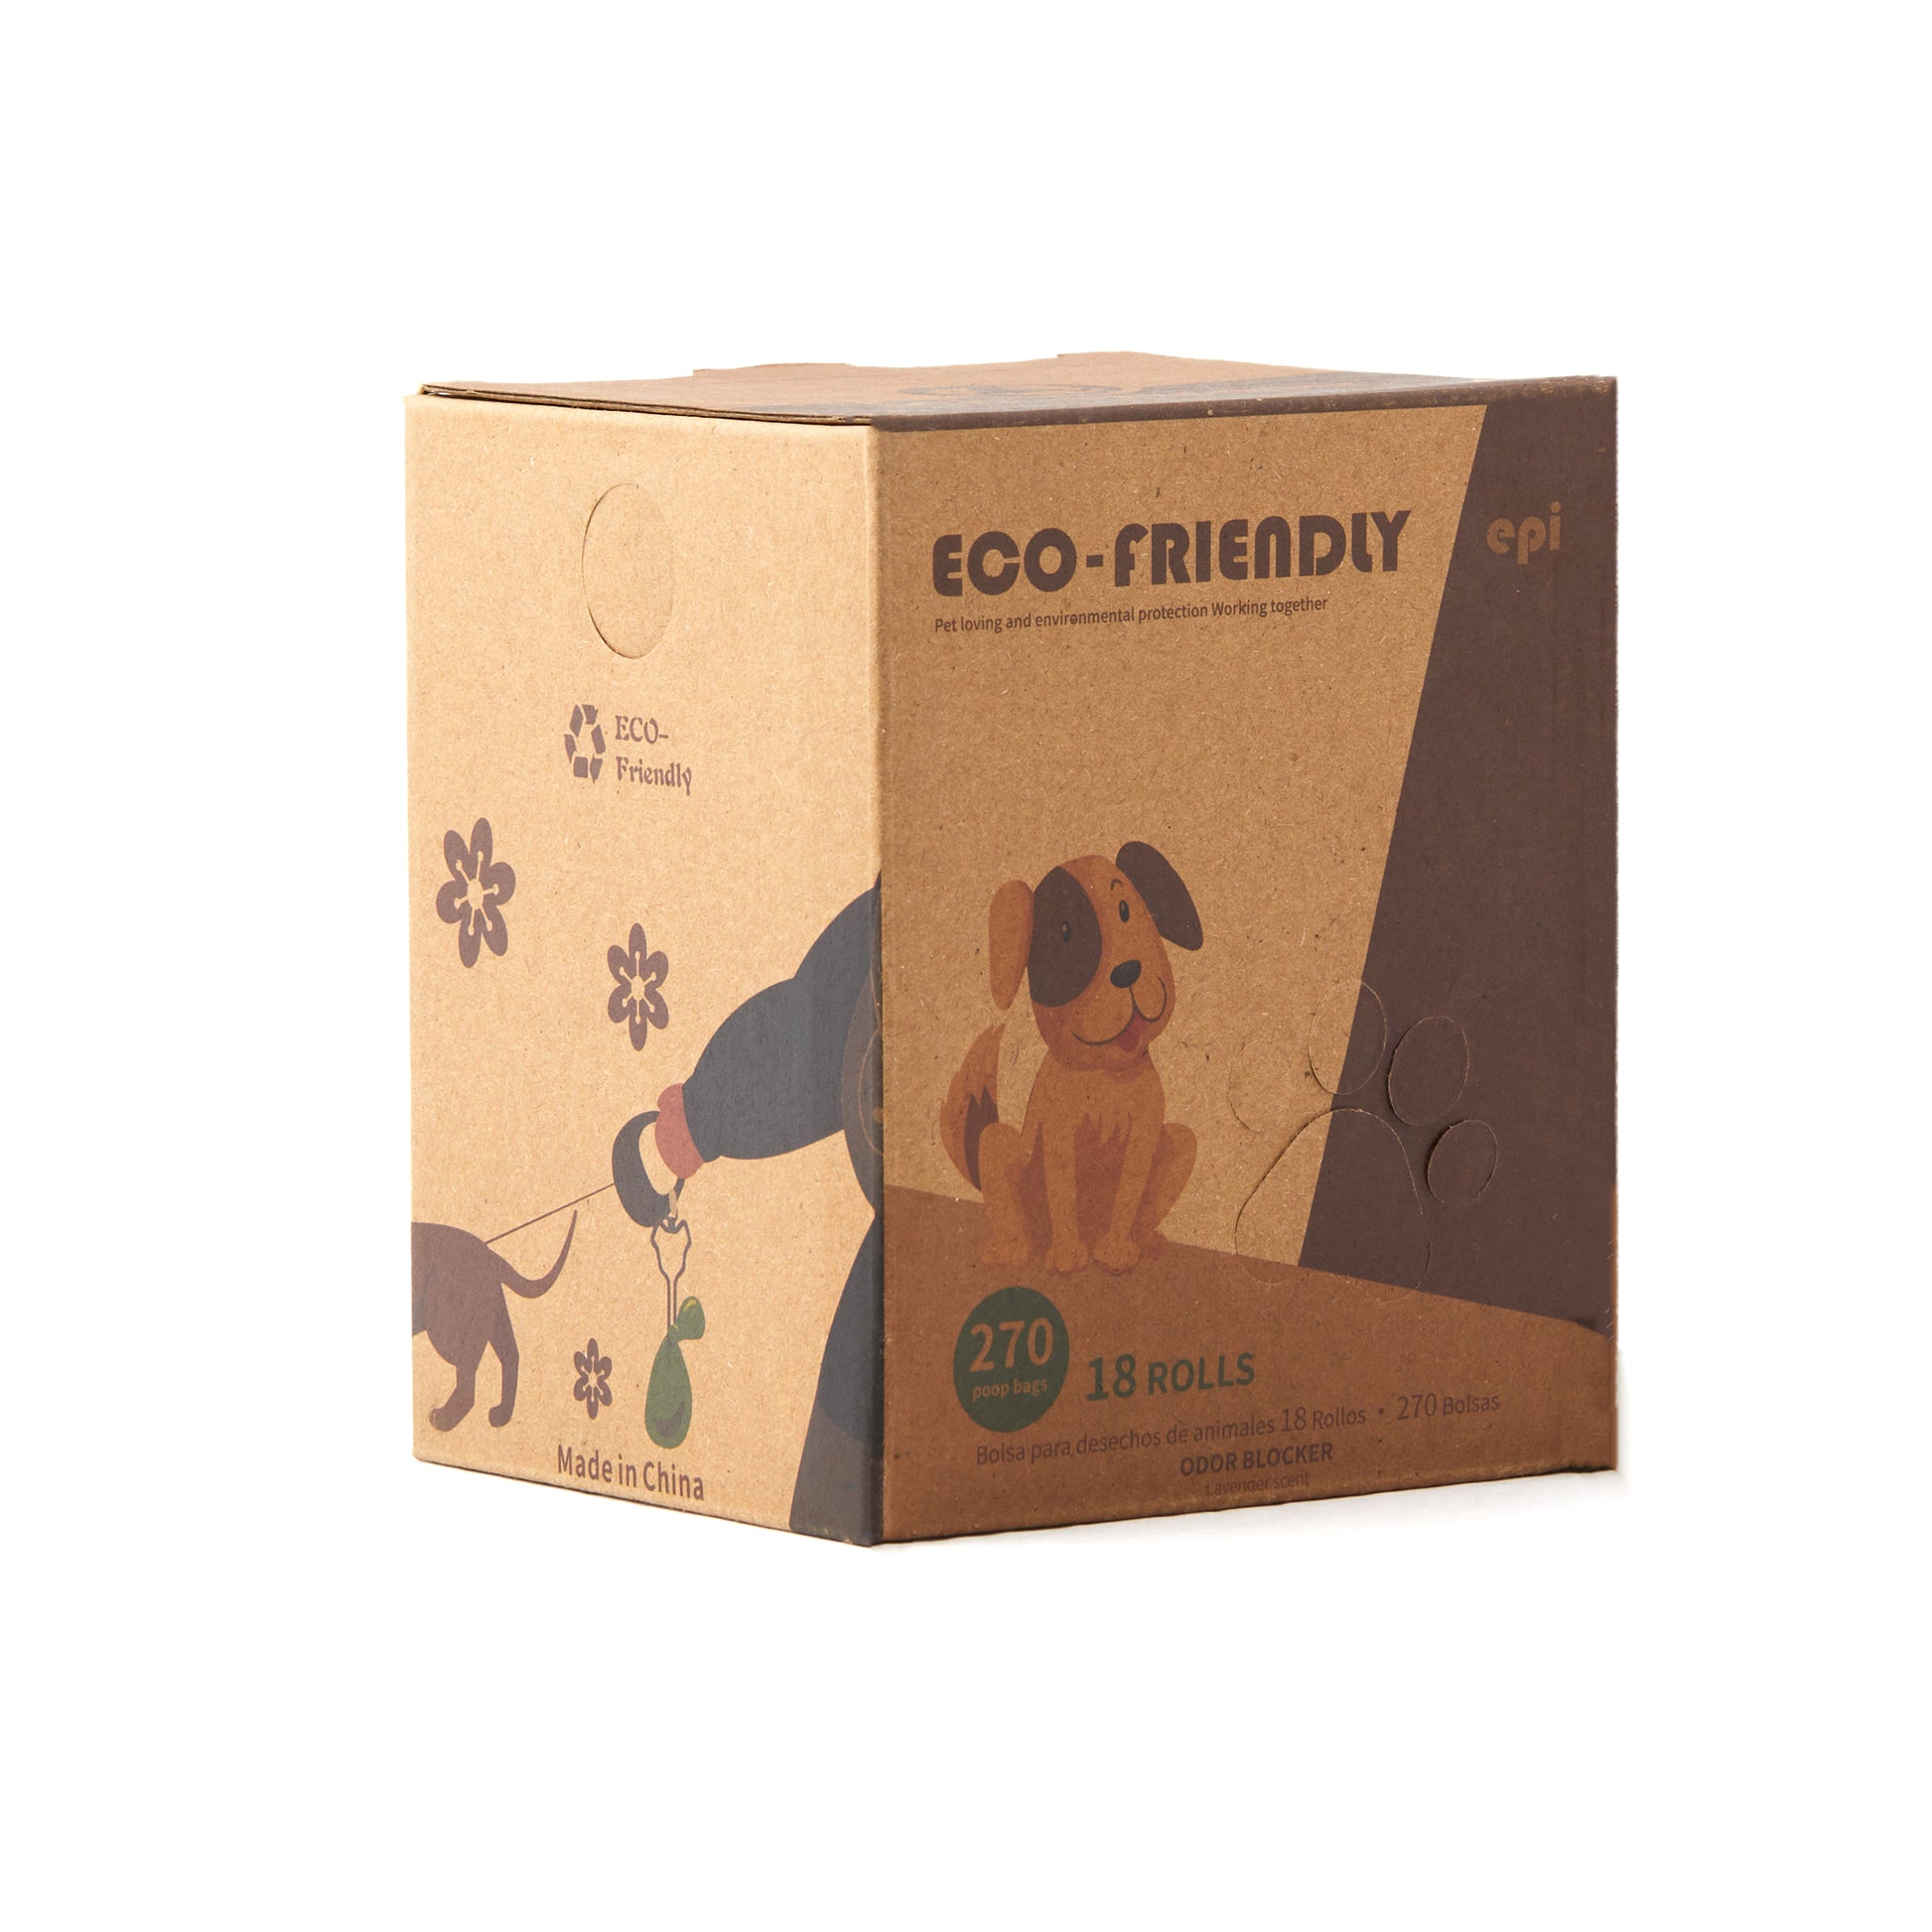 combo deal, high-quality puppy pad and eco-friendly dogs waste bags 100pcs of regular size puppy pads6